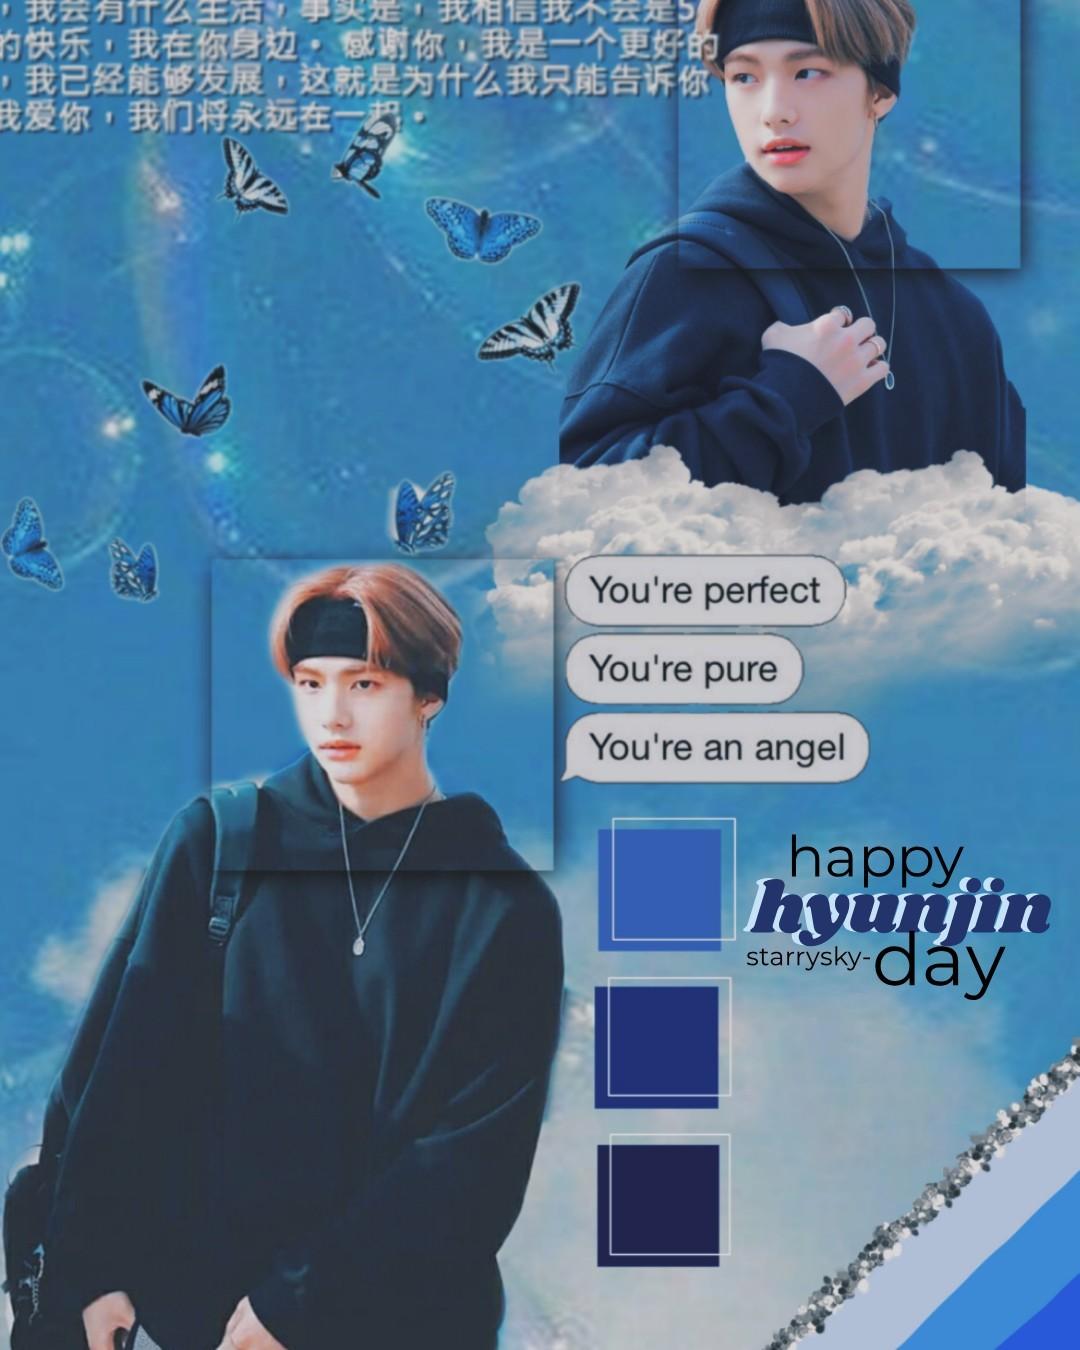 💙Tapityyyyy tappp💙
I'm sorry this was so rushed
HAPPY HYUNI DAYYY💓💓
hope you have an amazing day 💝
Keep being the sweet angel you are 😙